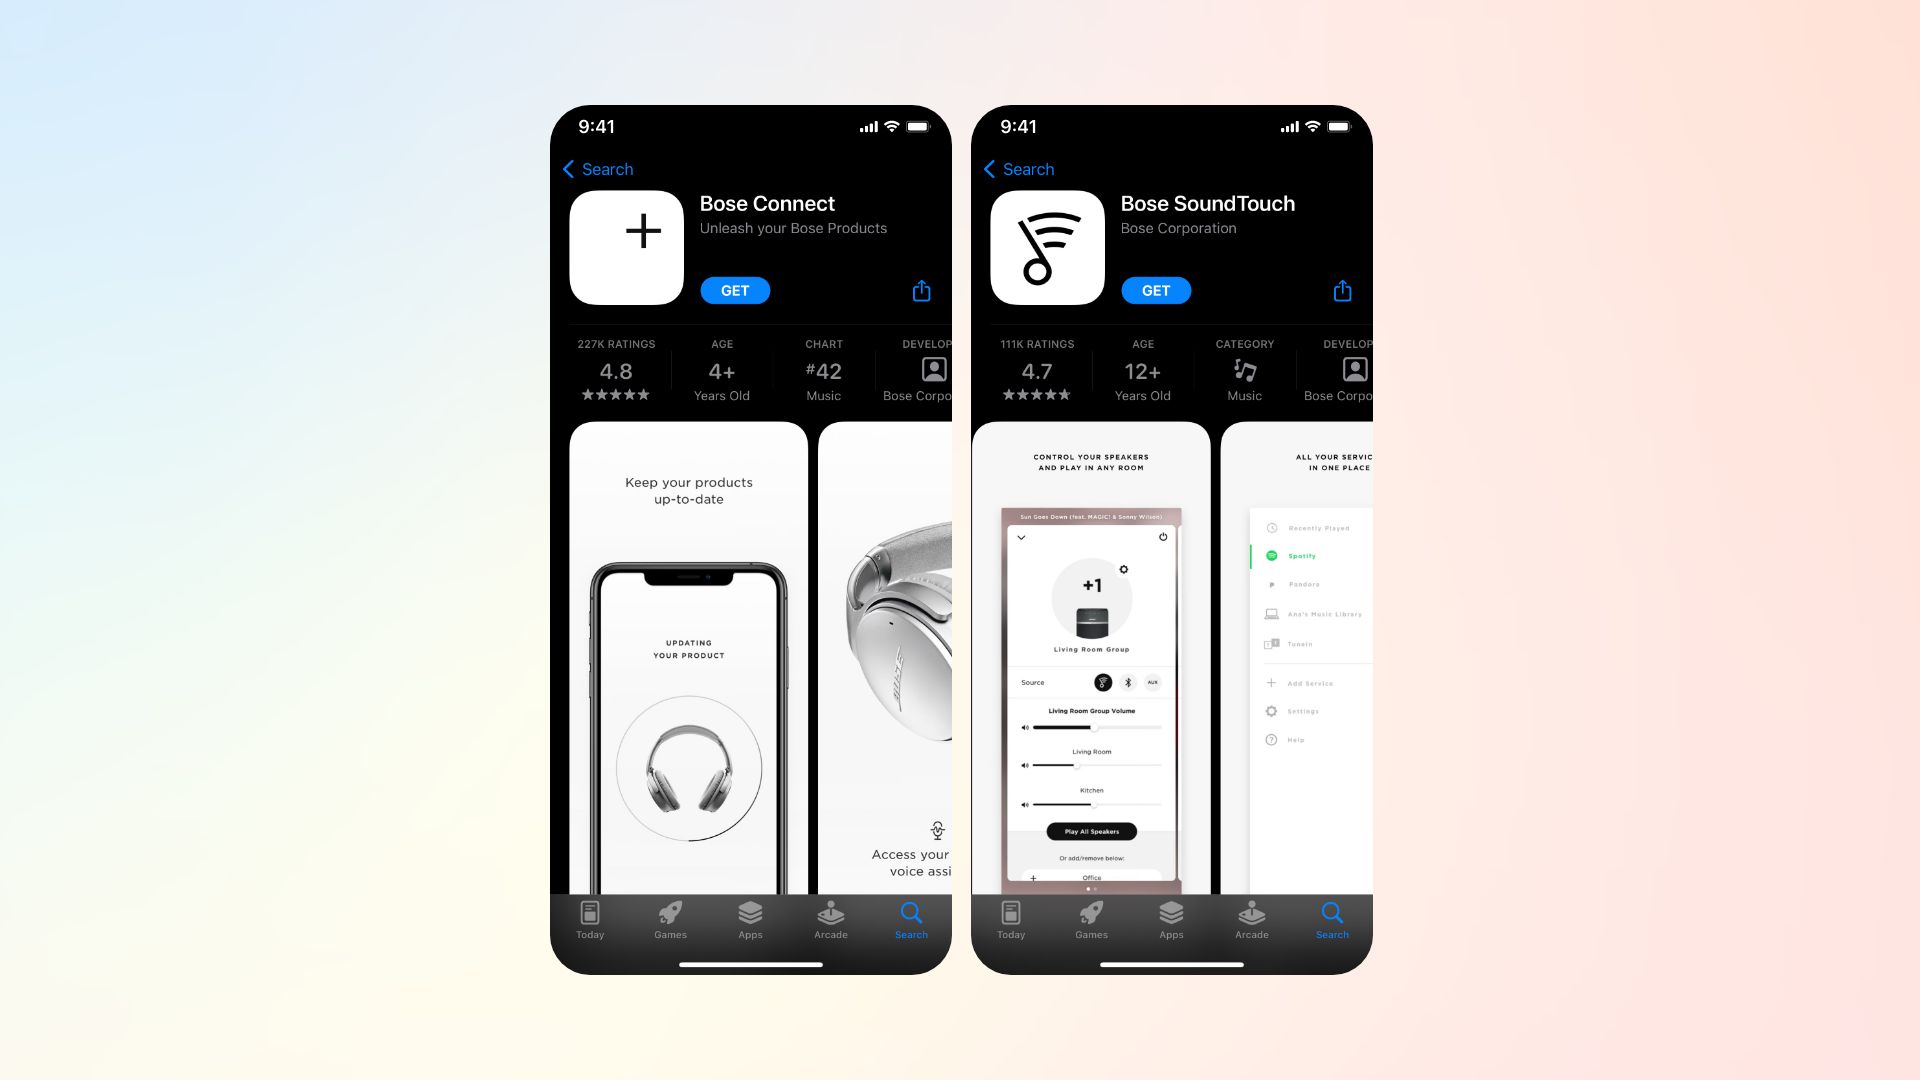 showing Bose connect and Bose SoundTouch apps